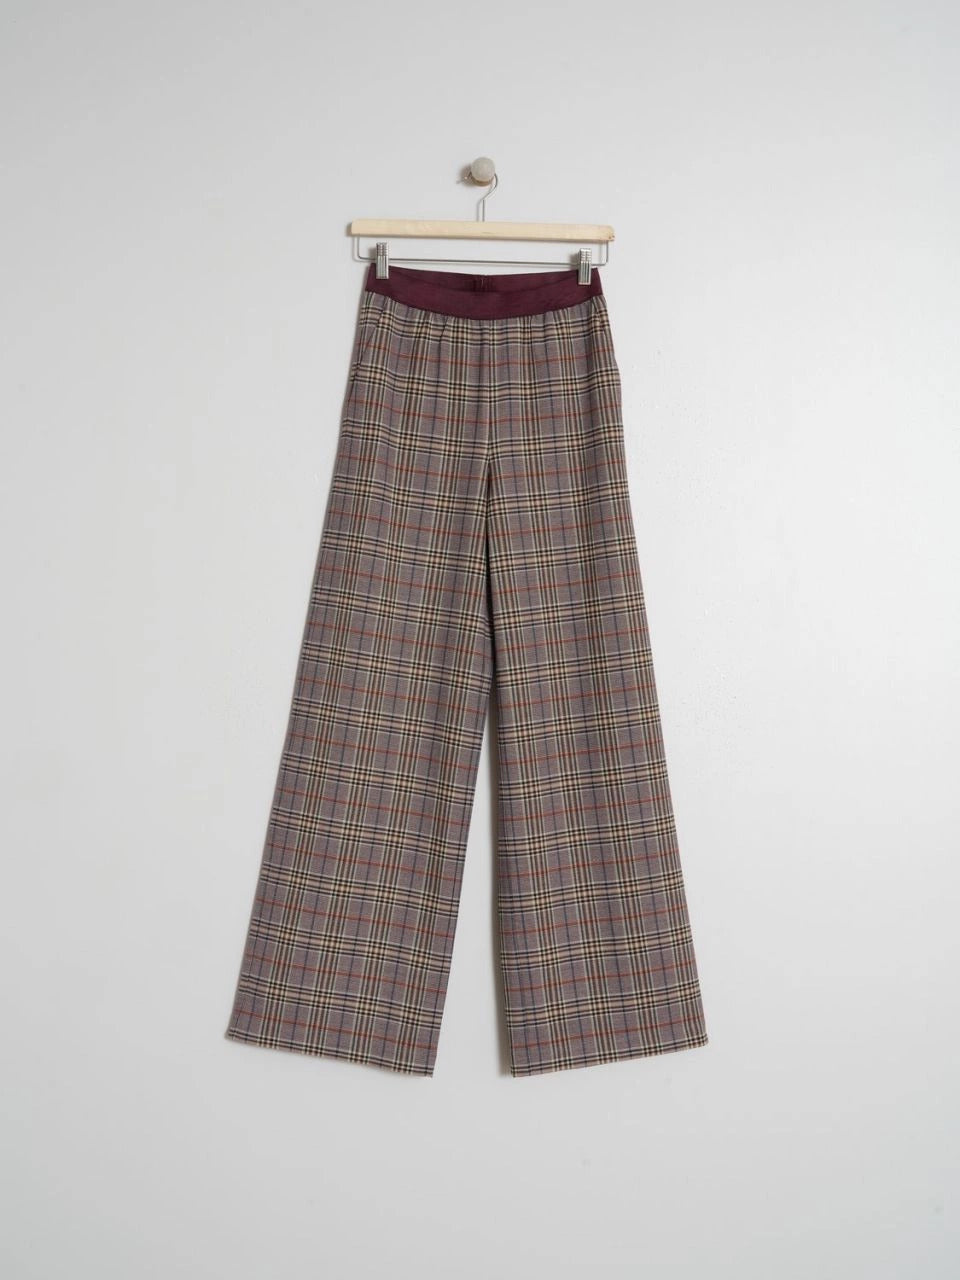 these indi & cold tartan trousers in burgundy tomes with a touch of blue are about to become your new go-to! The elastic waistband ensures a comfy fit, while the French front pockets and a flowy maxi length give it that cool, everyday look.  lemon cyprus boutique